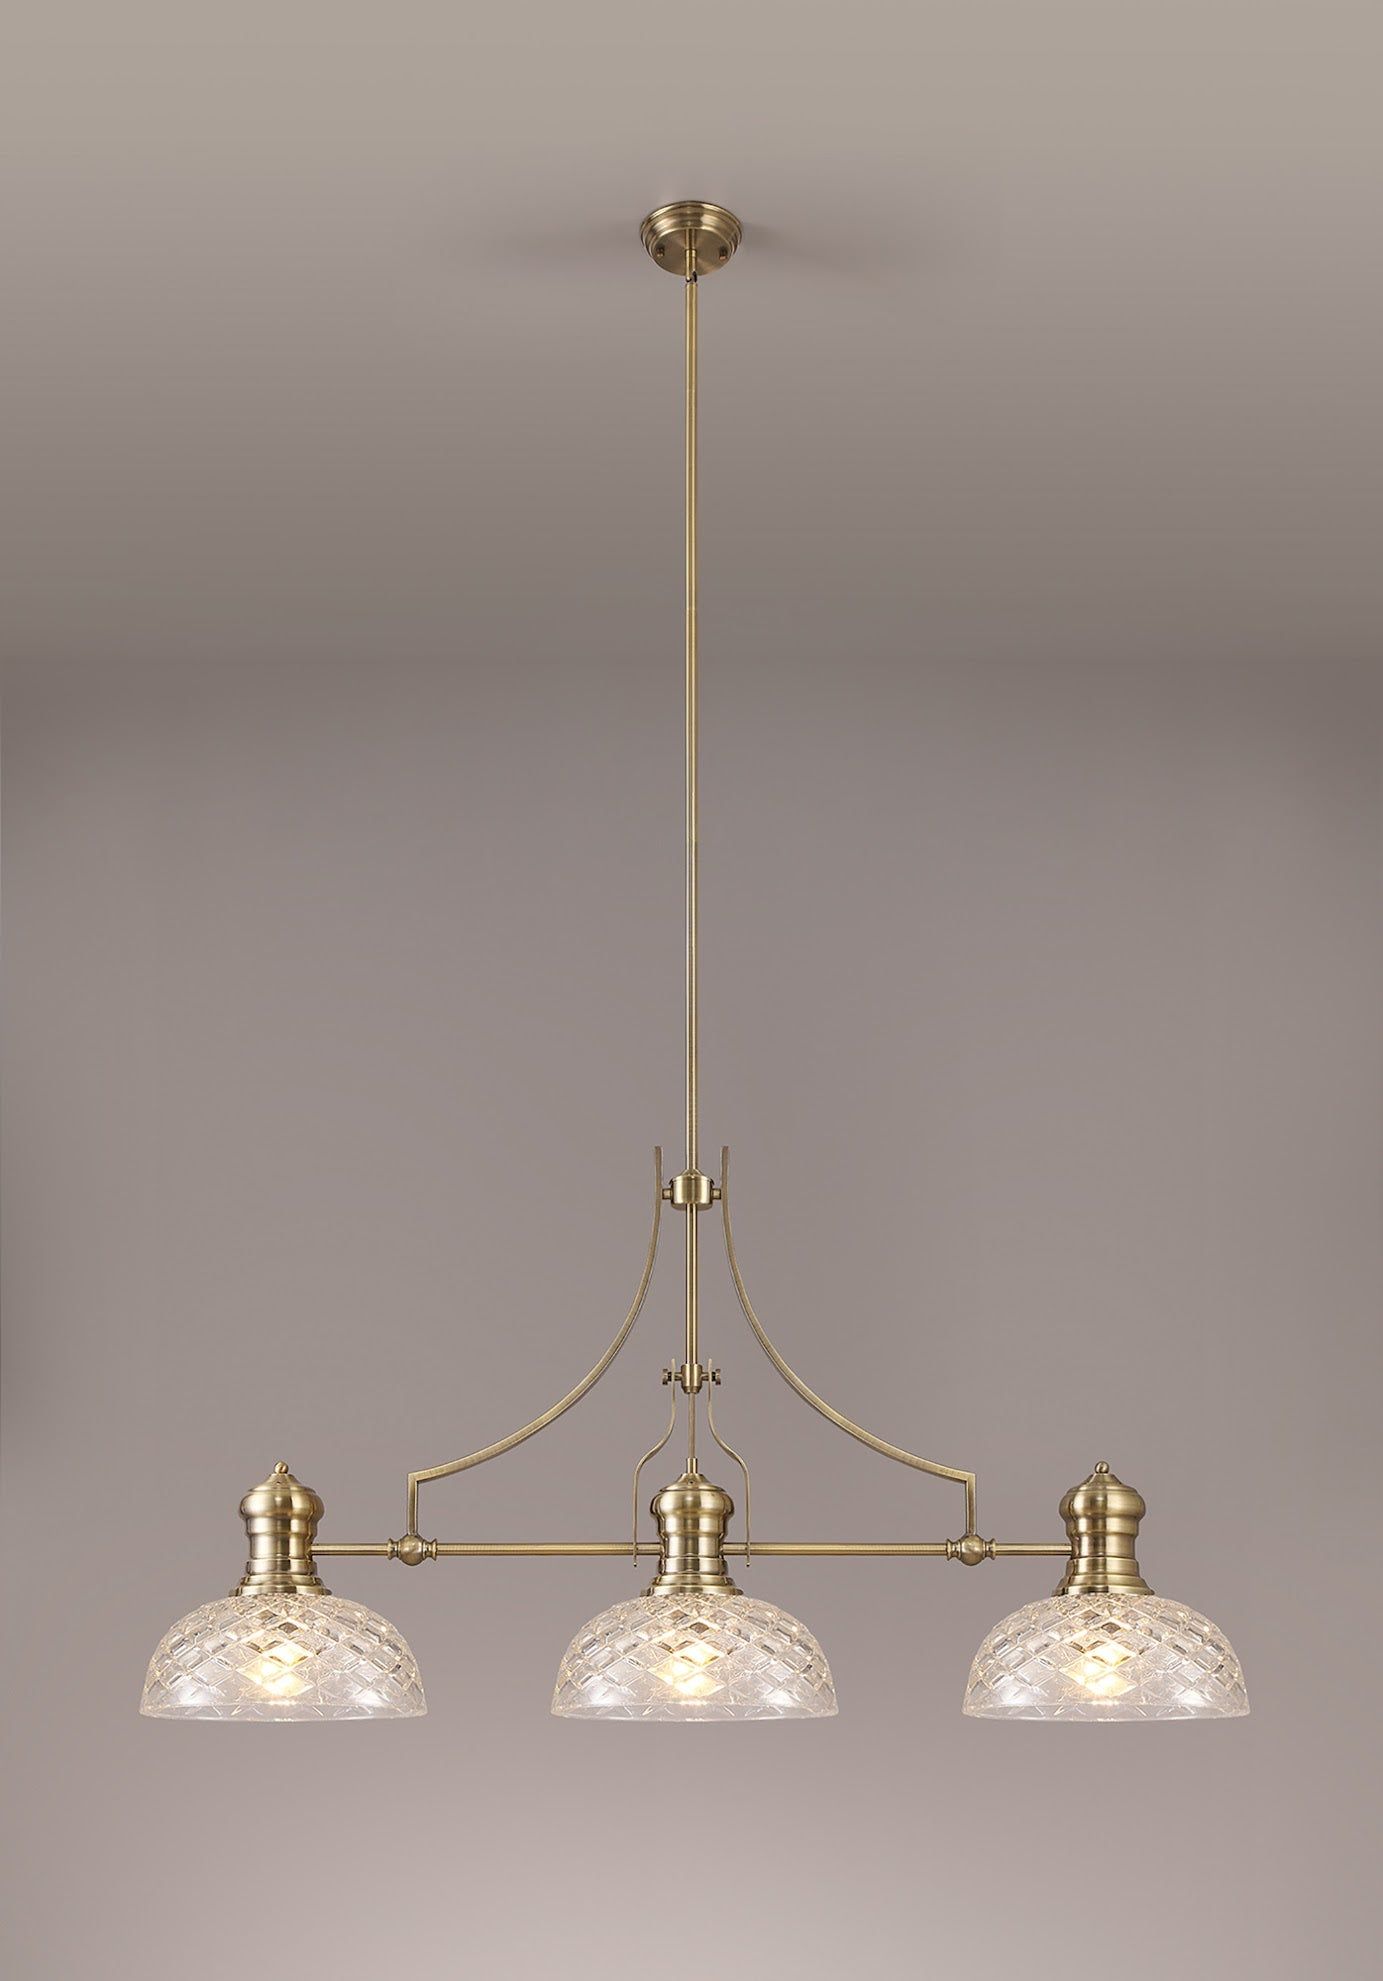 Savannah Linear Pendant With 30cm Flat Round Patterned Shade, 3 x E27, Antique Brass/Clear Glass